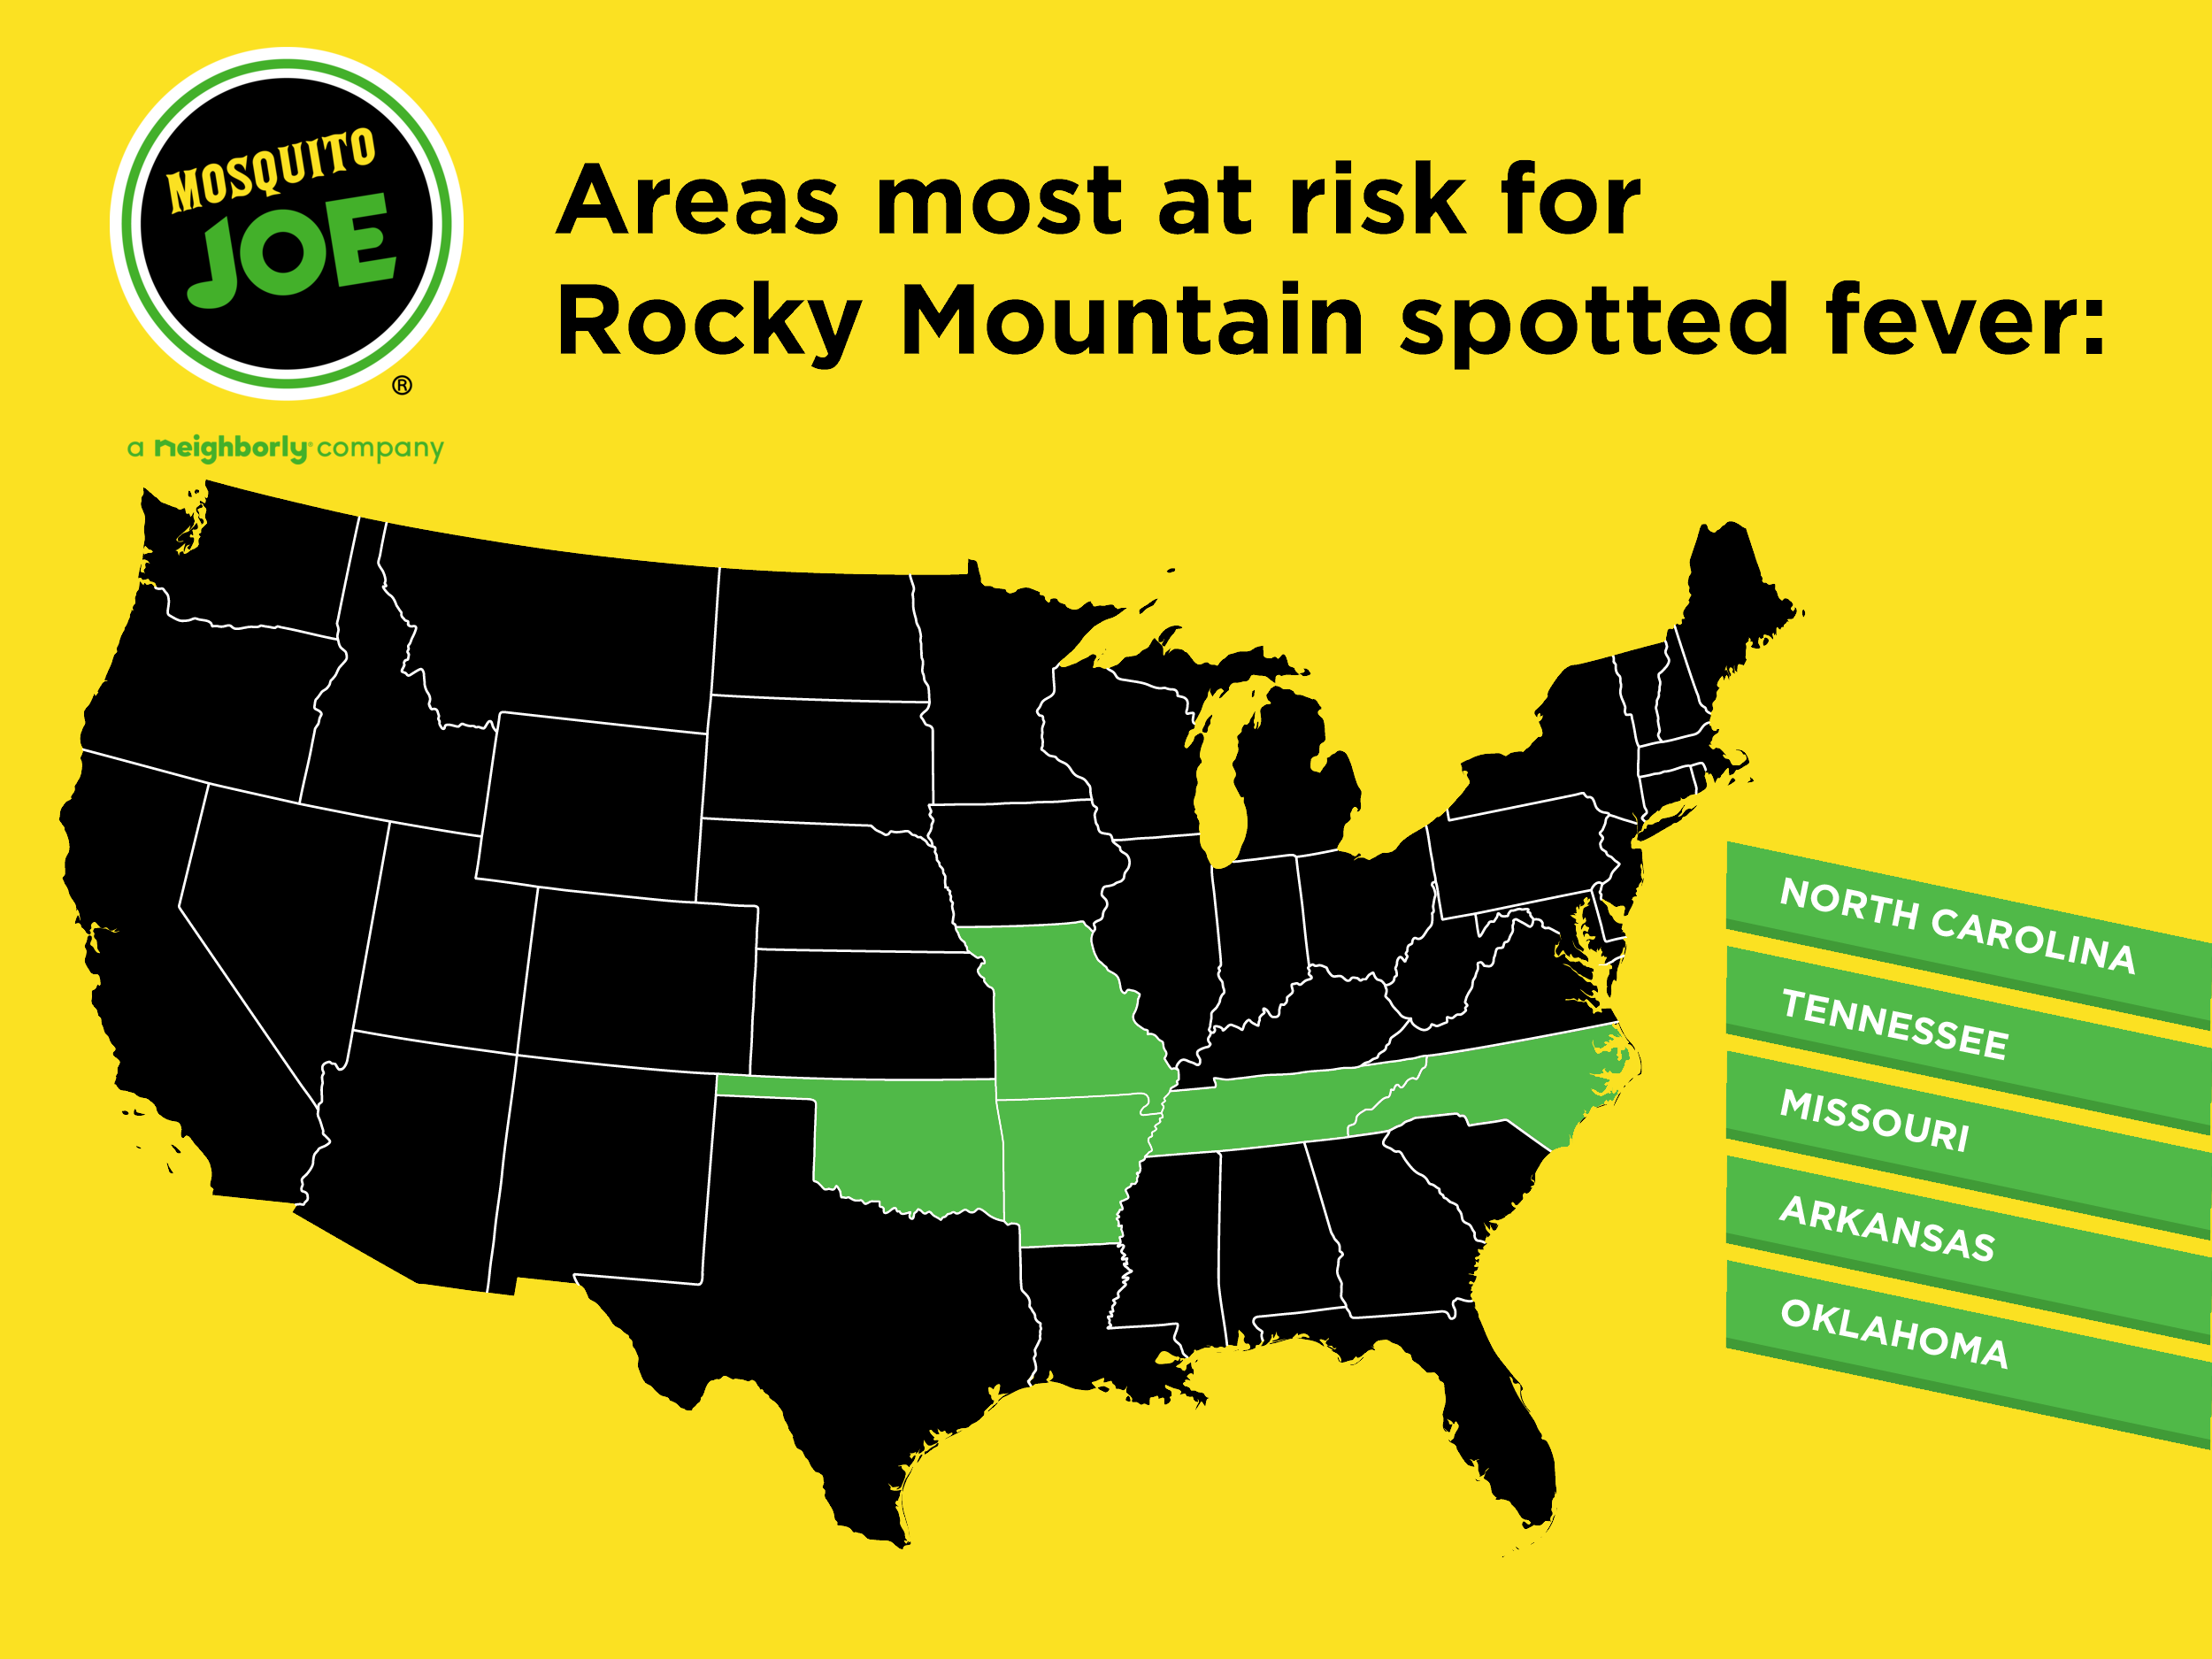 Areas most at risk for Rocky Mountain spotted fever